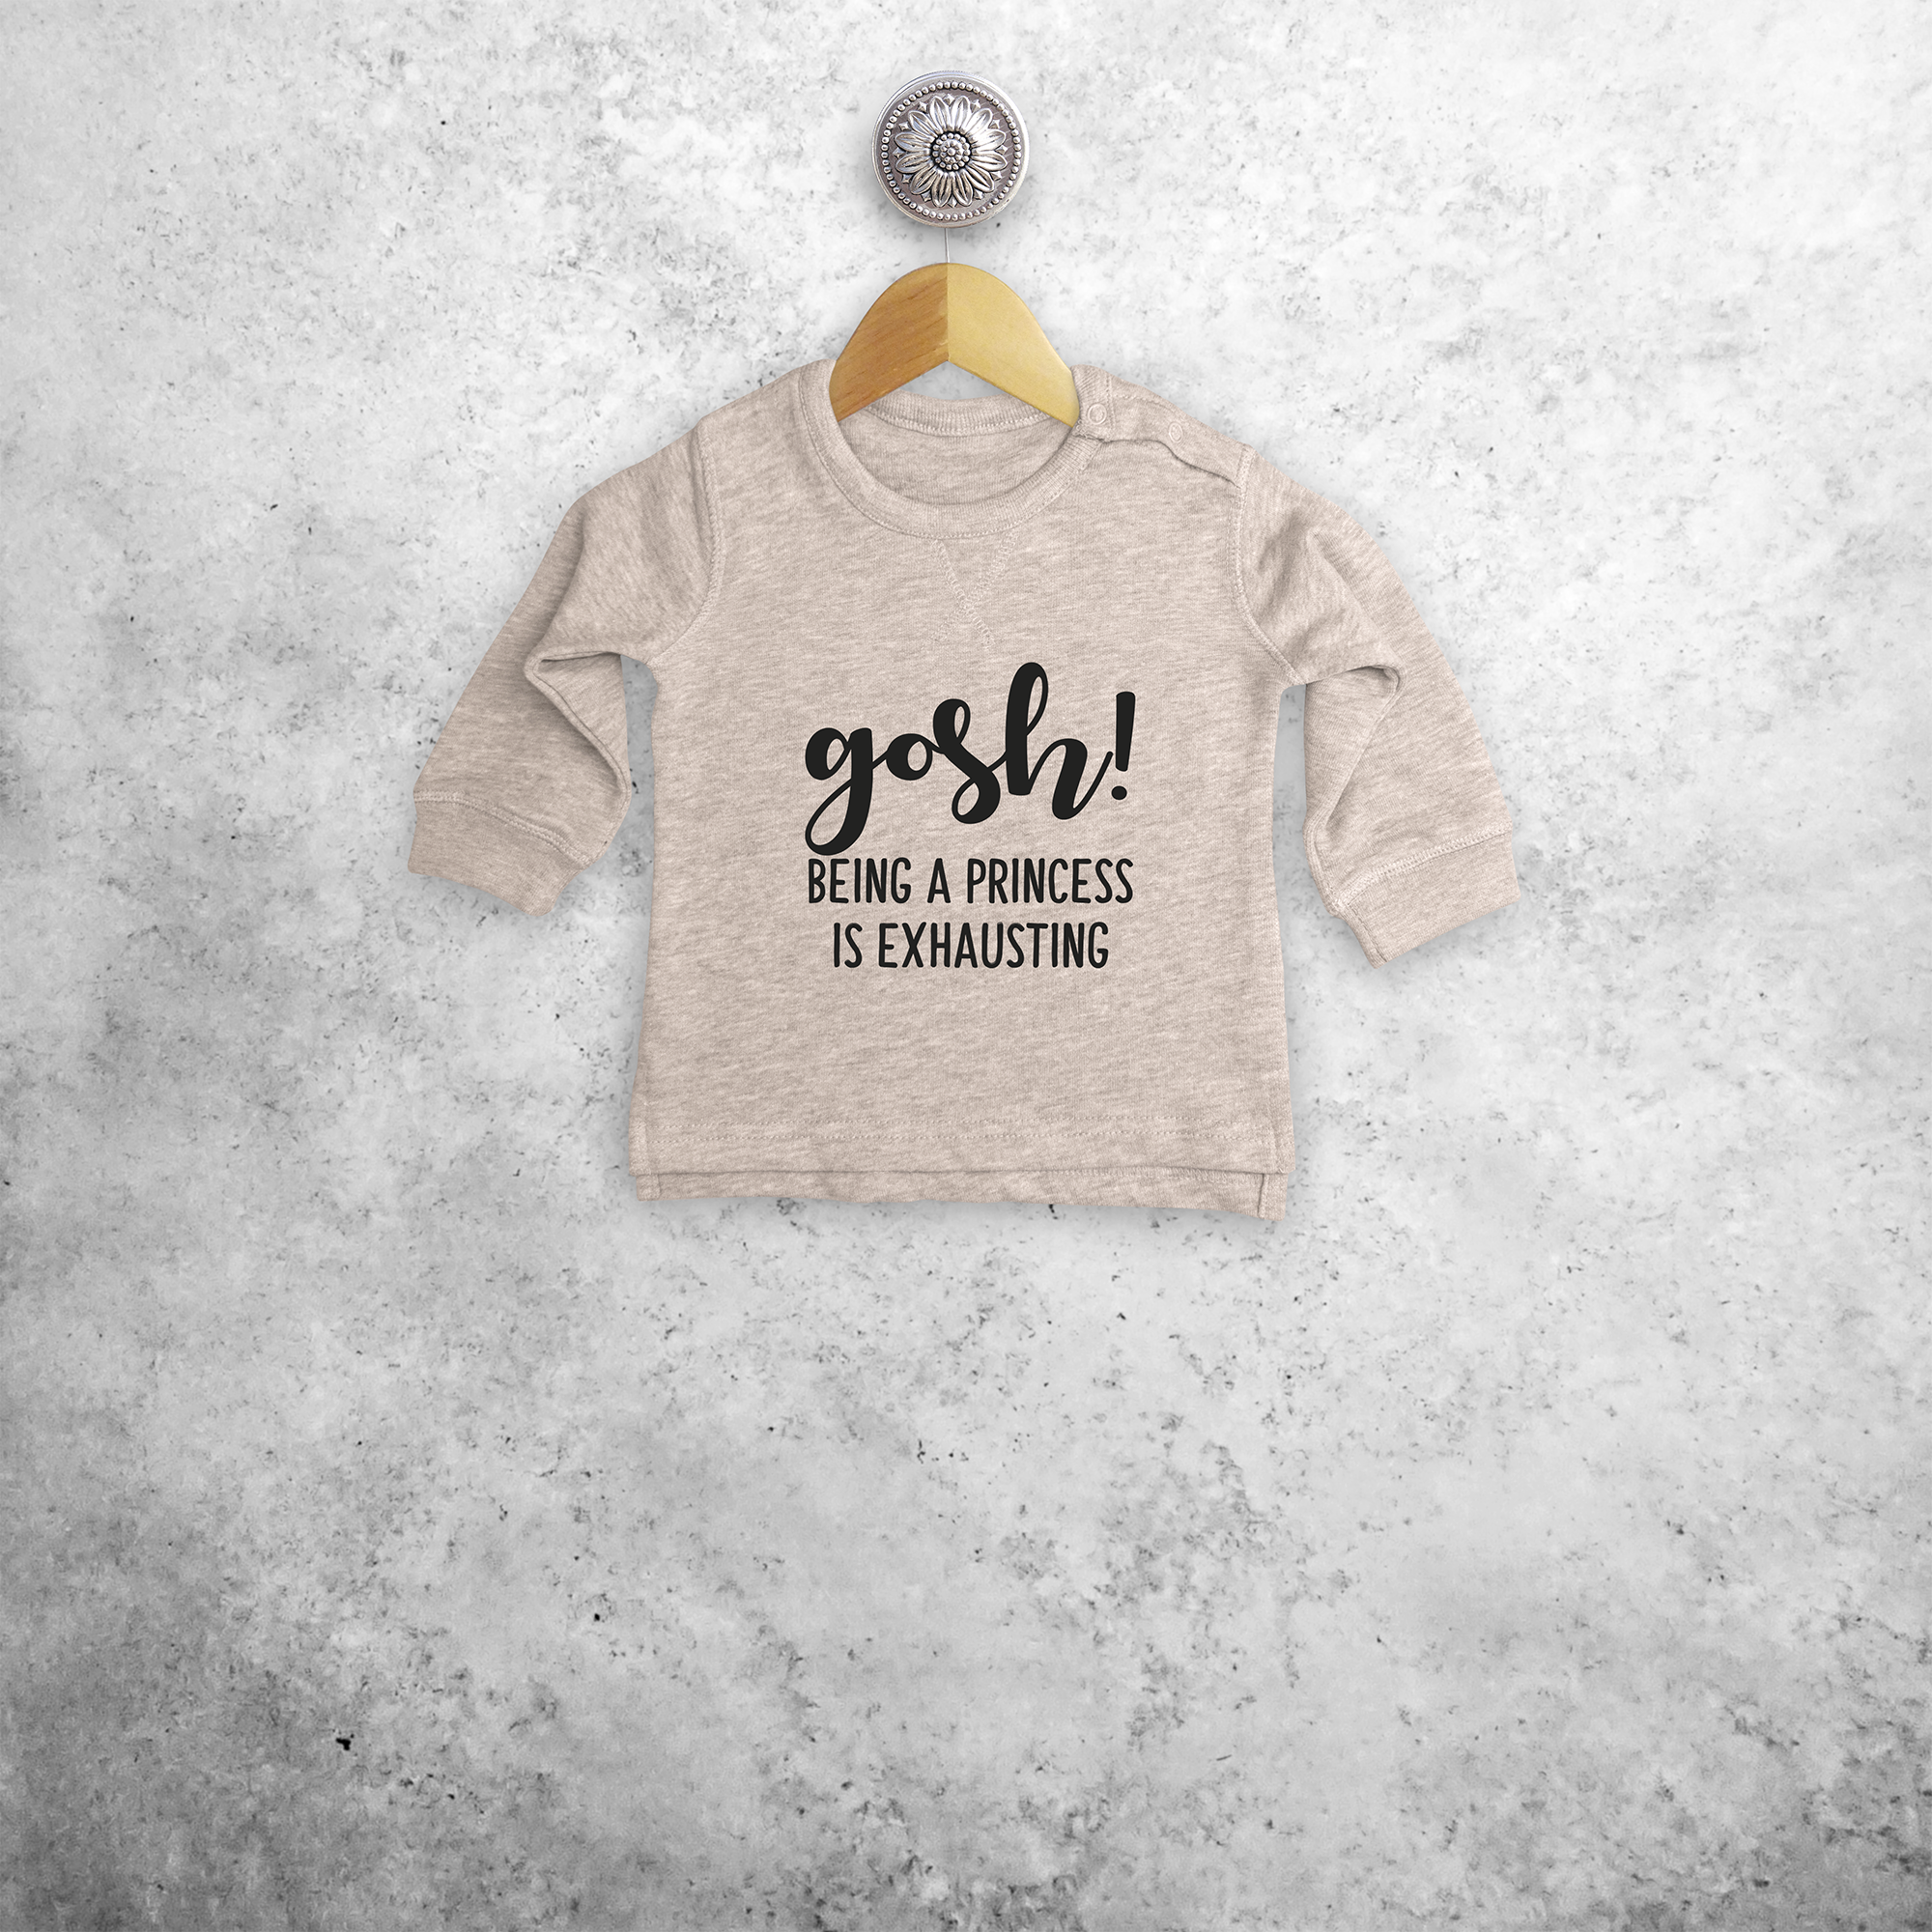 'Gosh! Being a princess is exhausting' baby sweater